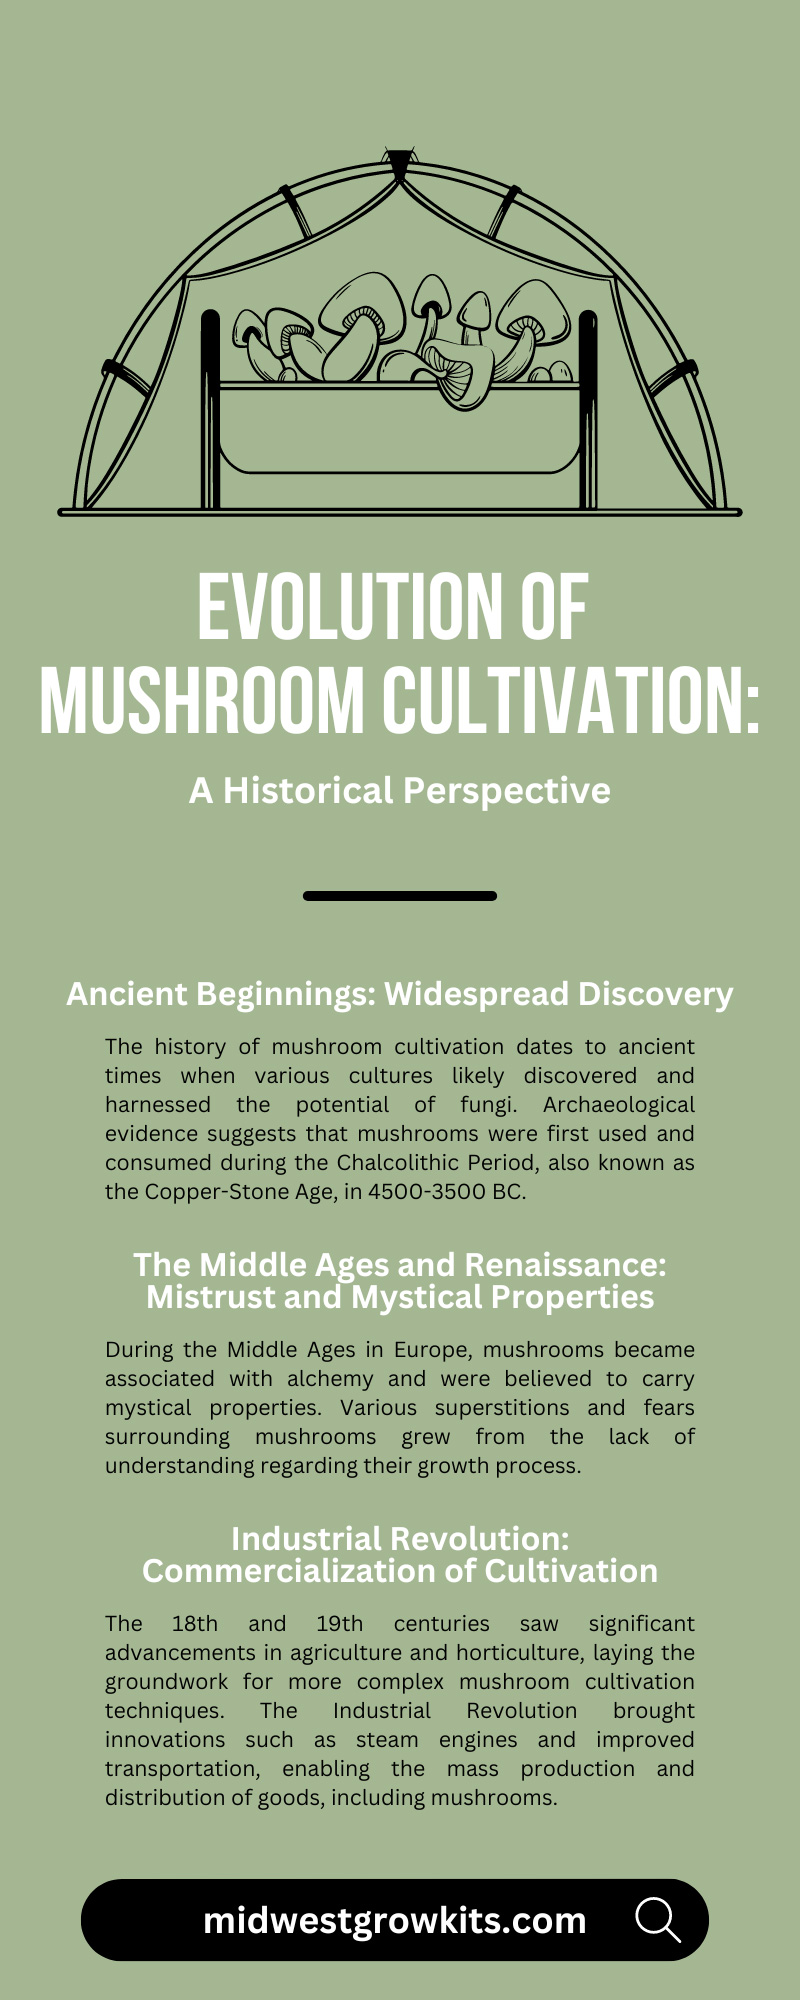 Evolution of Mushroom Cultivation: A Historical Perspective